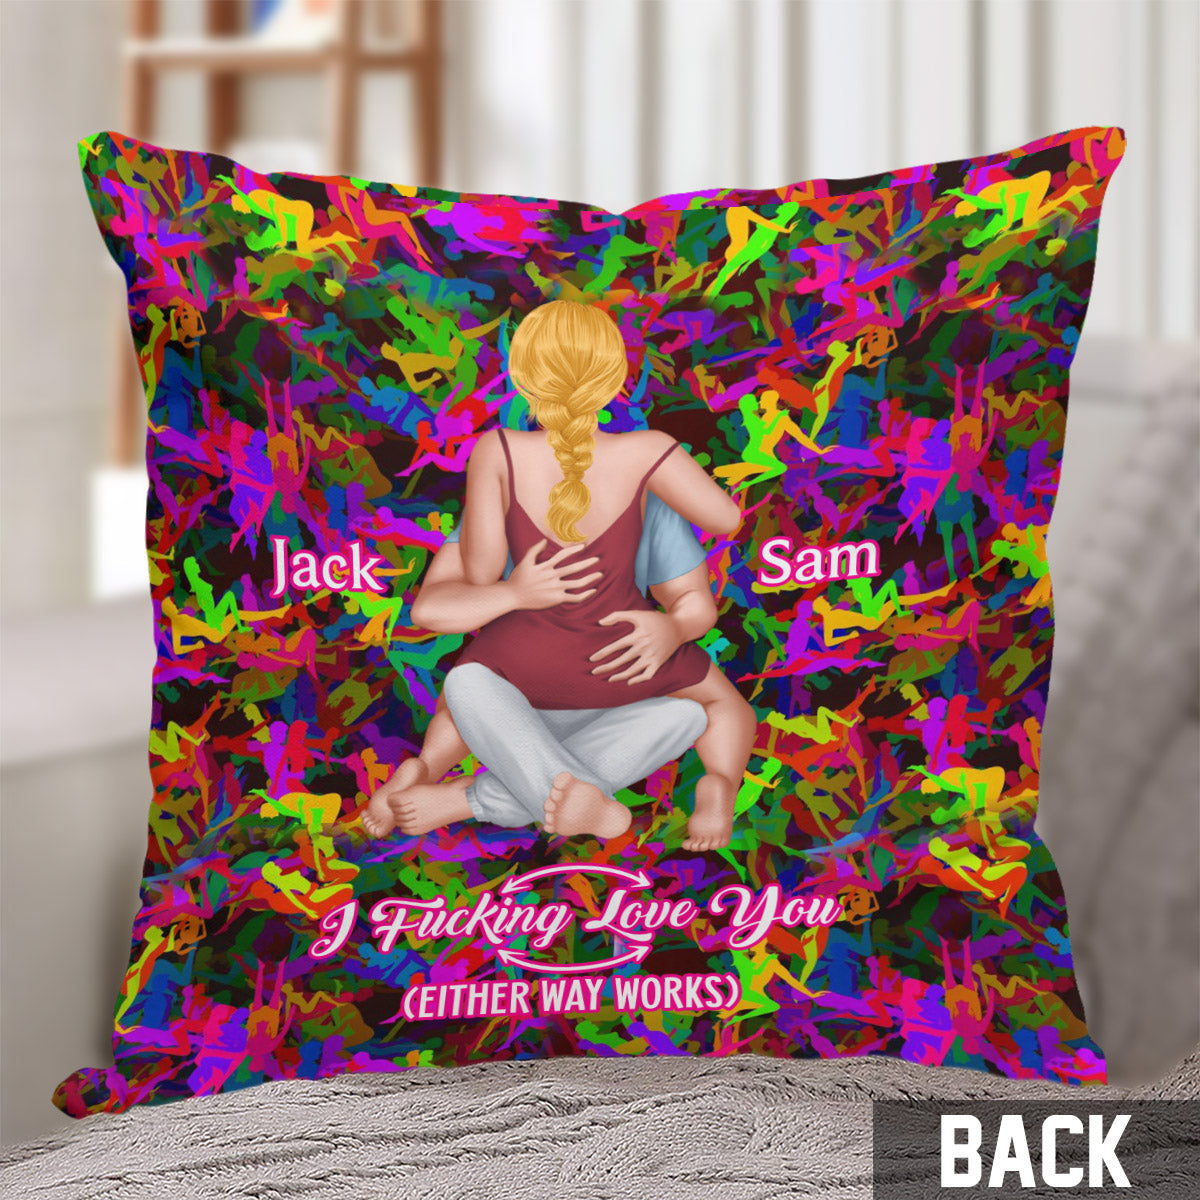 I Love You - Personalized Couple Throw Pillow